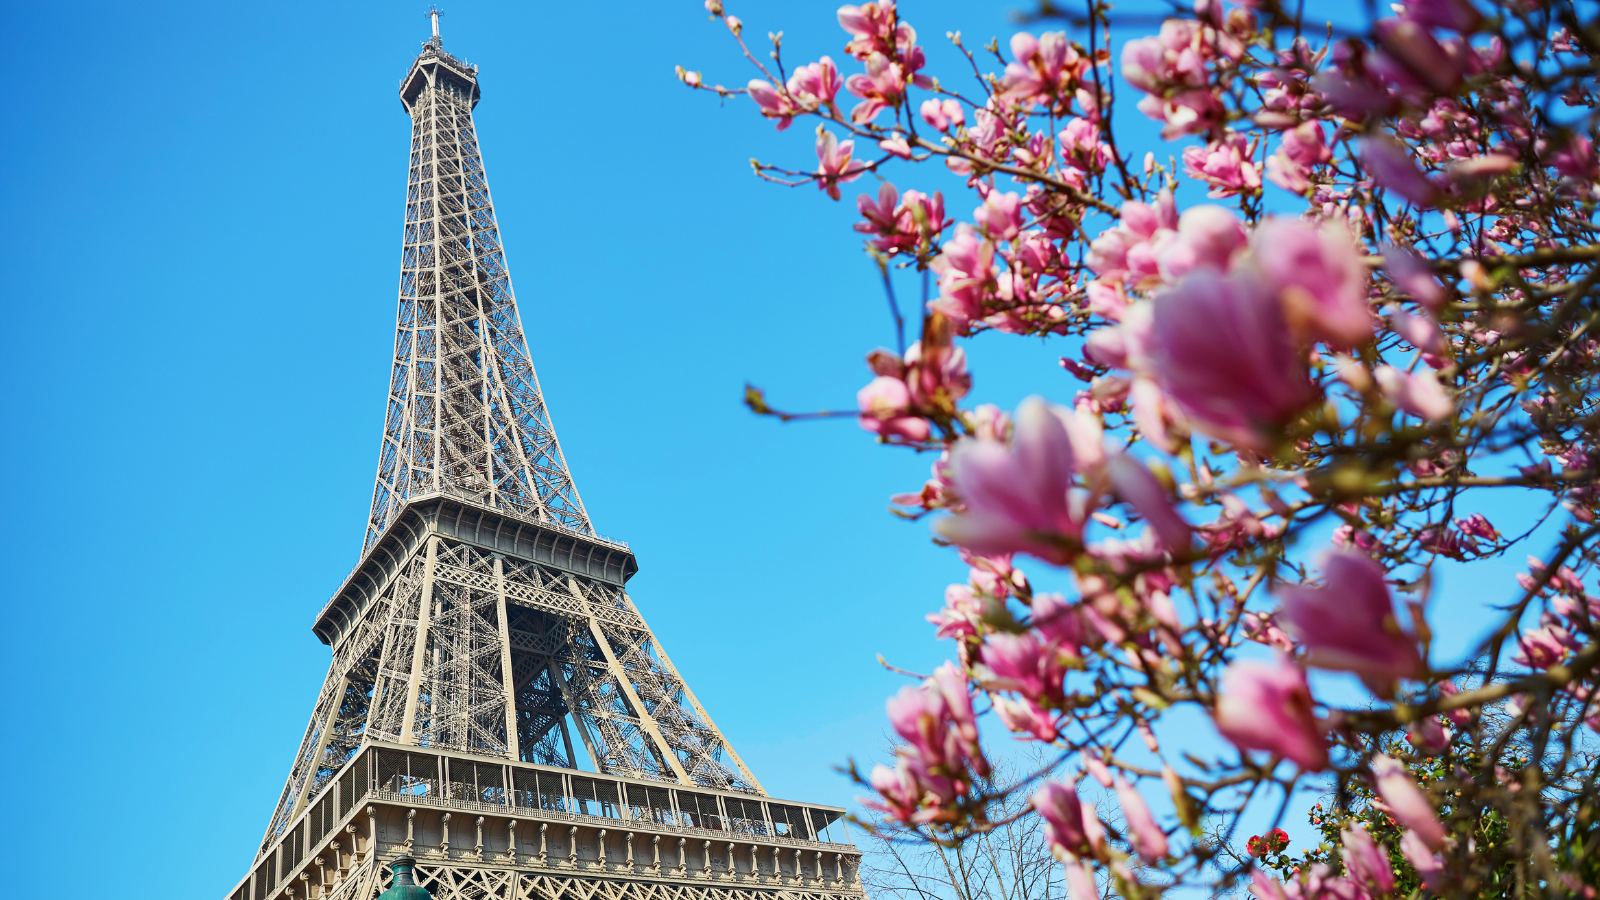 Travel to France in 4 seasons trip in spring - cherry blossoms in Paris